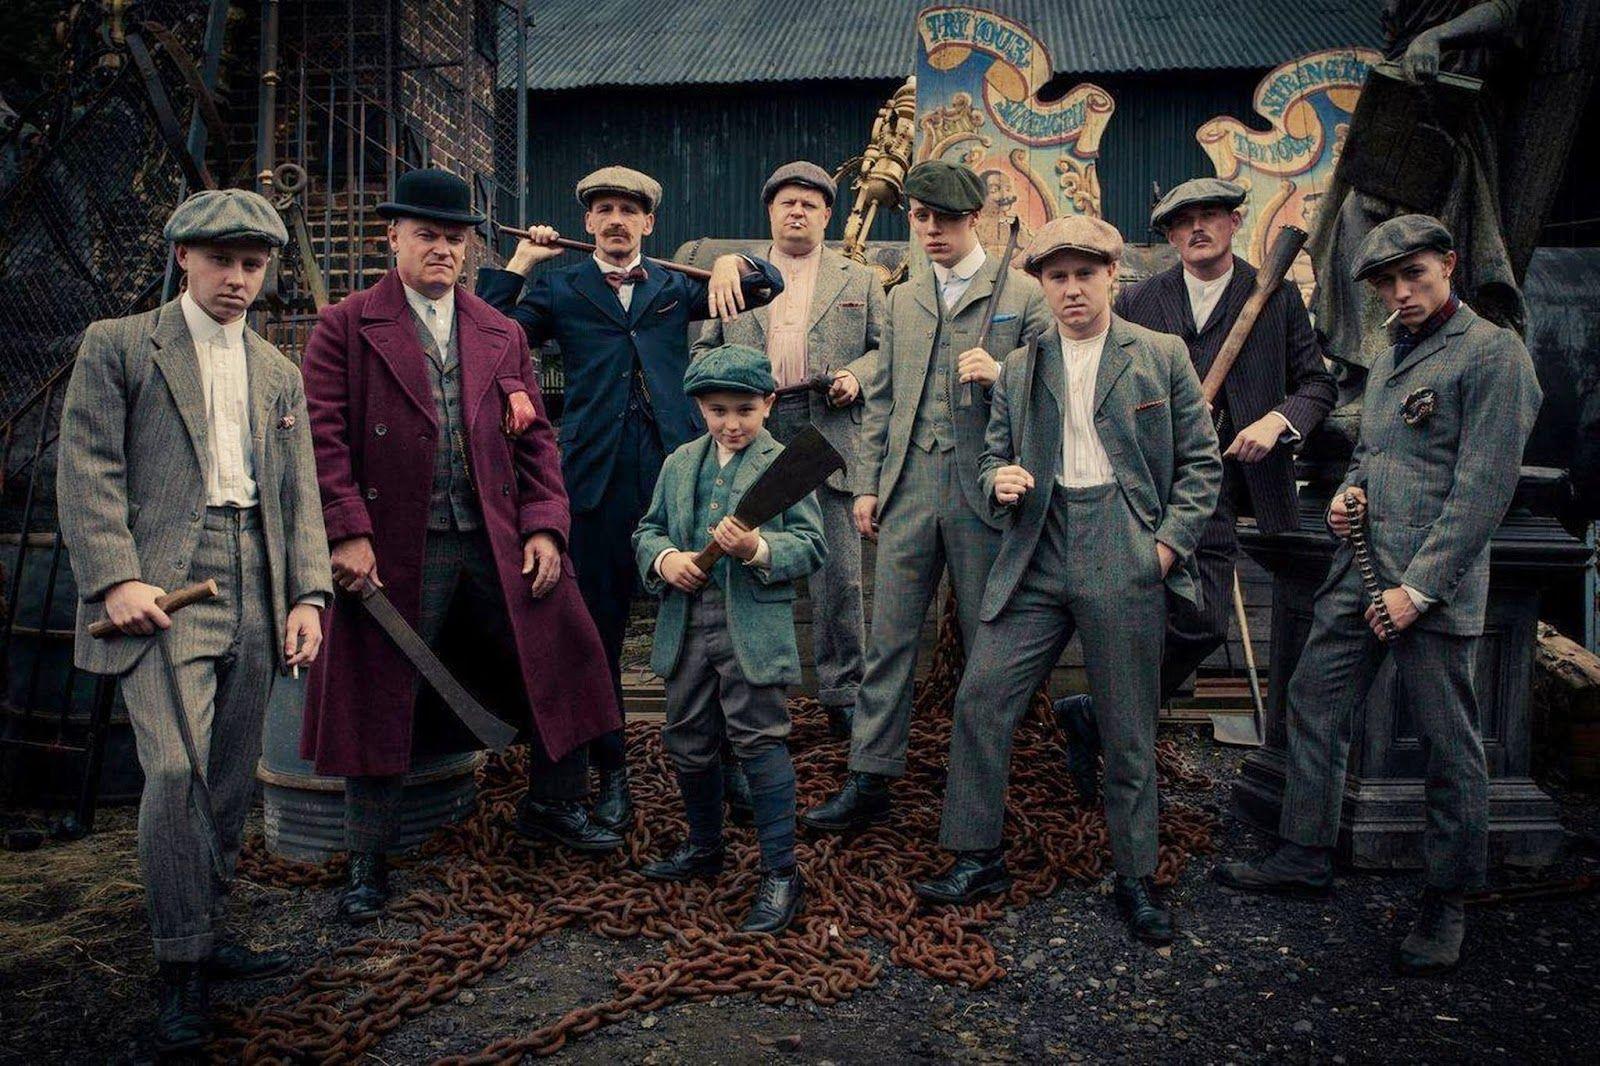 Peaky Blinders is a British historical crime drama television